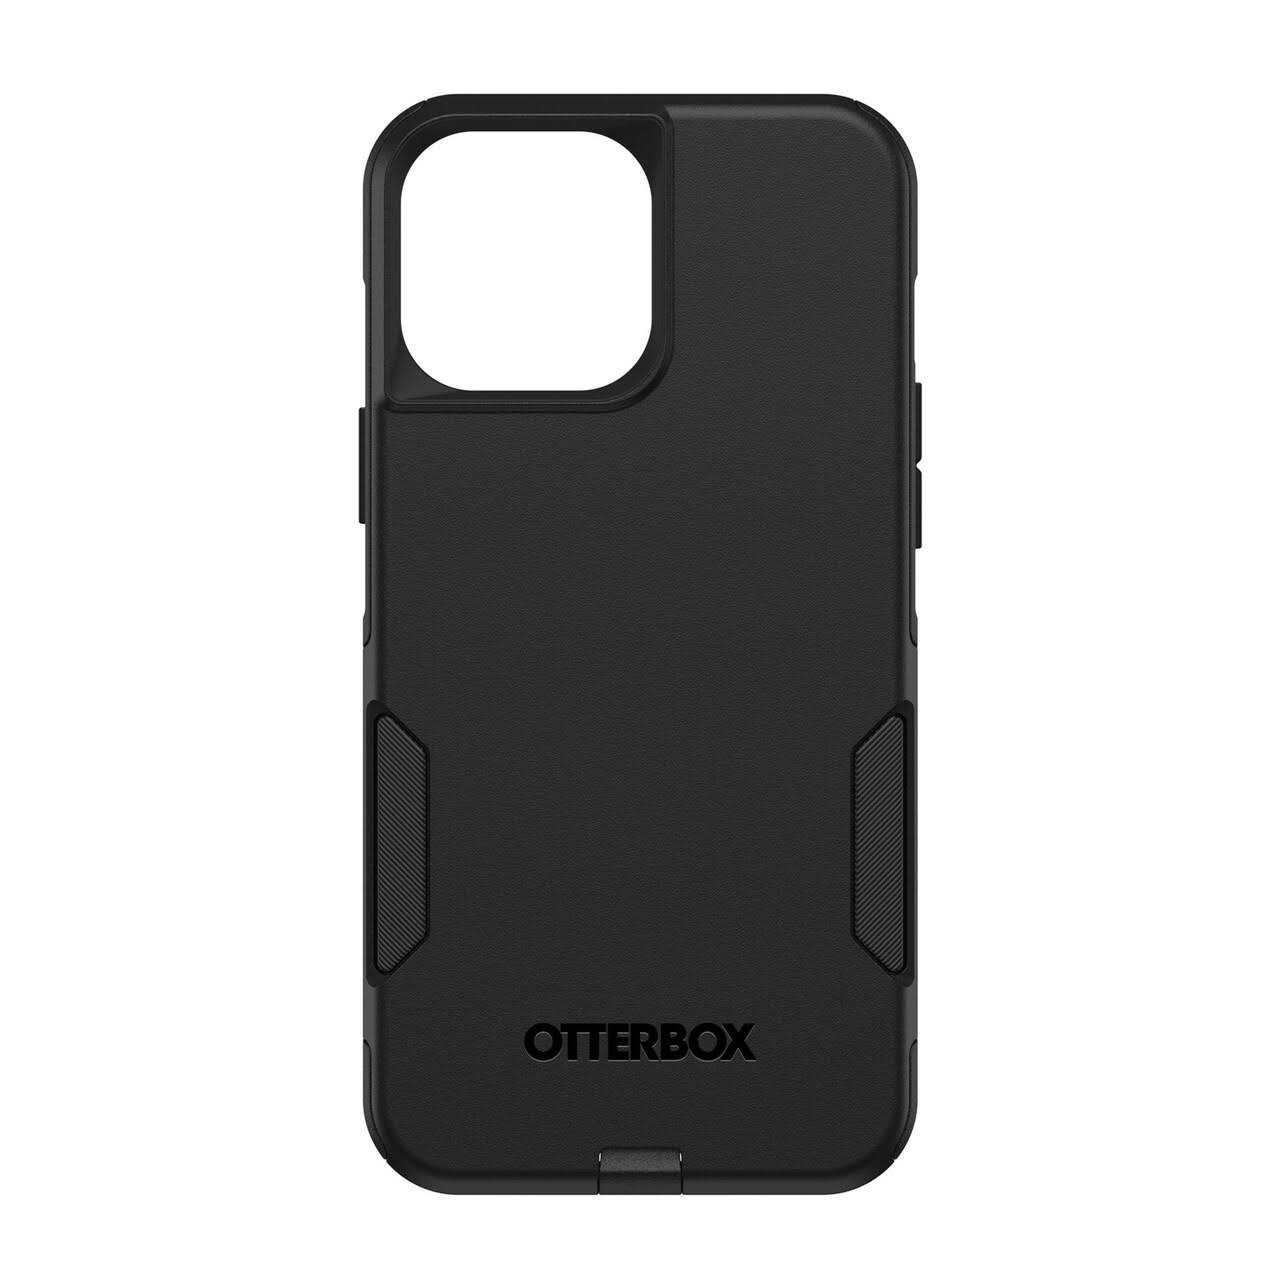 Otterbox Commuter Protective iPhone 13 Pro Max & 12 Case - Black